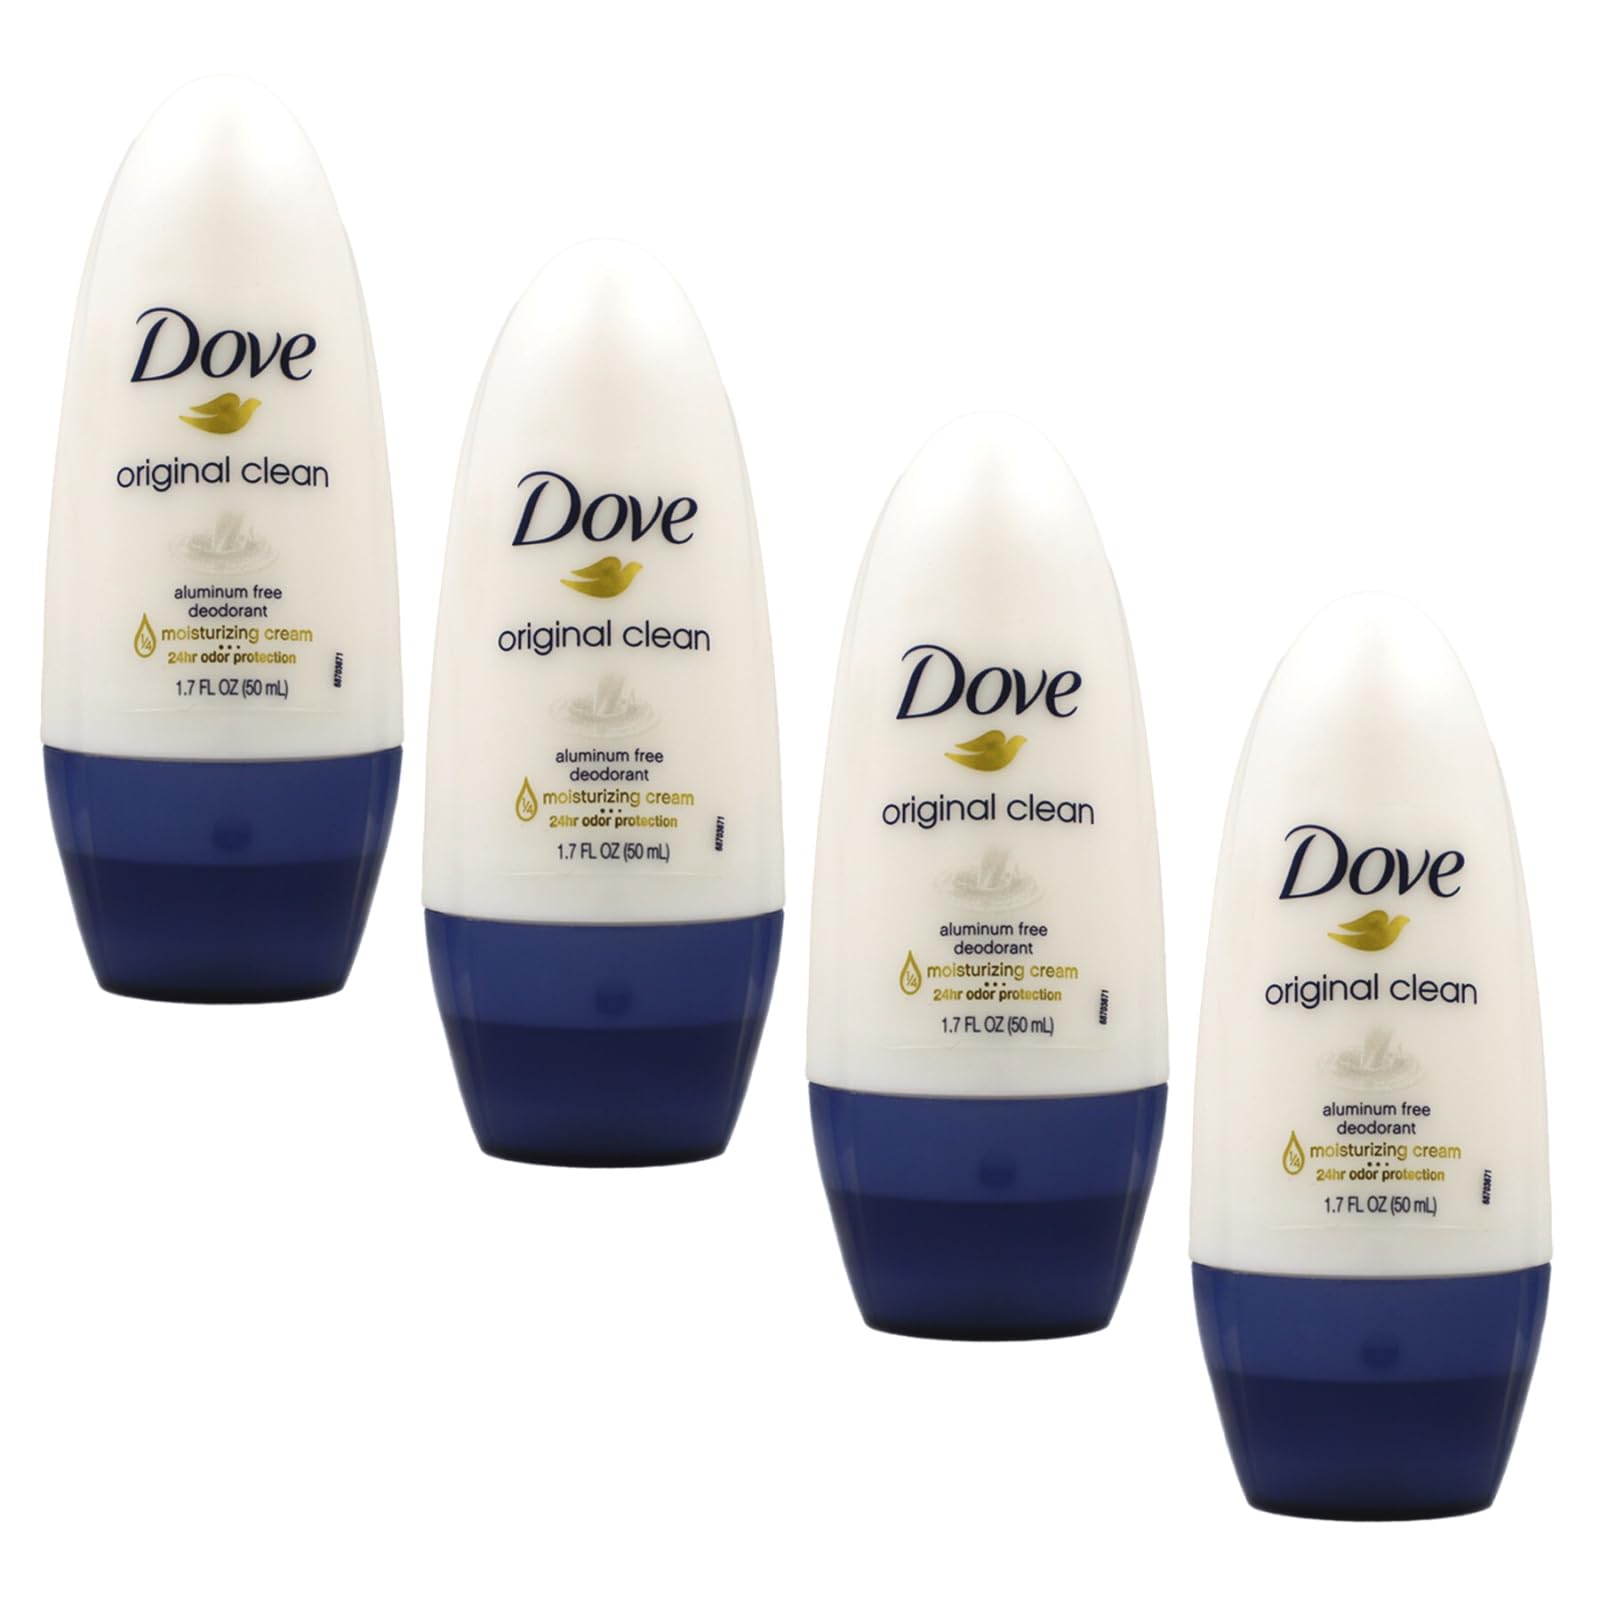 4-Count 1.7-Oz Dove Original Clean Roll On Aluminum Free Deodorant $3.25 ($0.80 each) + Free Shipping w/ Prime or on $35+